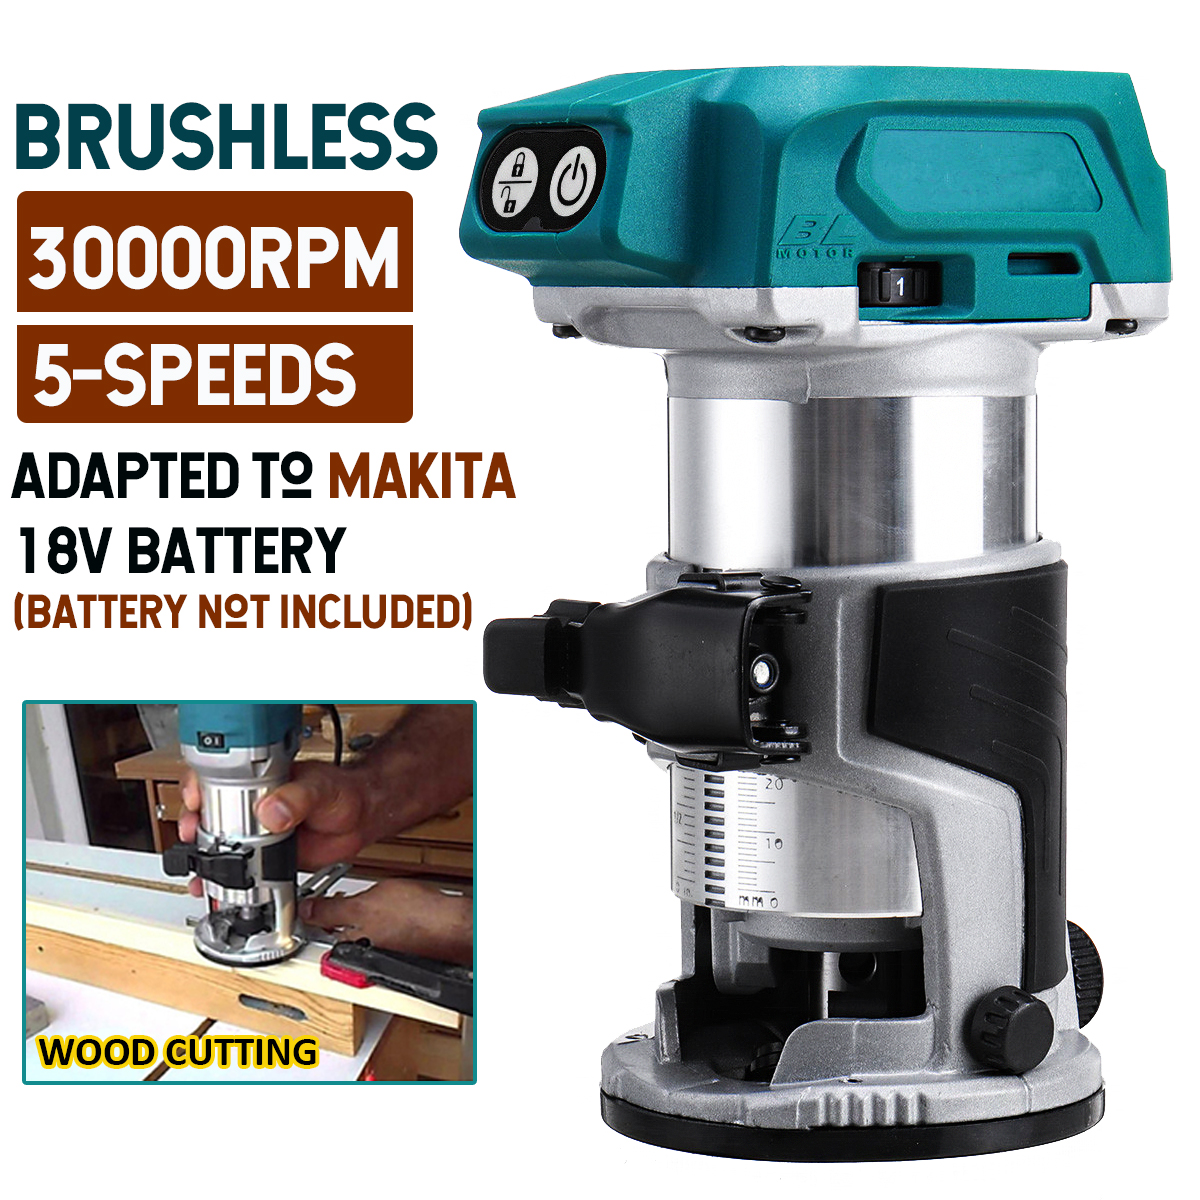 DC901-1-Brushless-Wood-Trimmer-Electric-Wood-Router-Trimmer-For-Makita-1894801-4